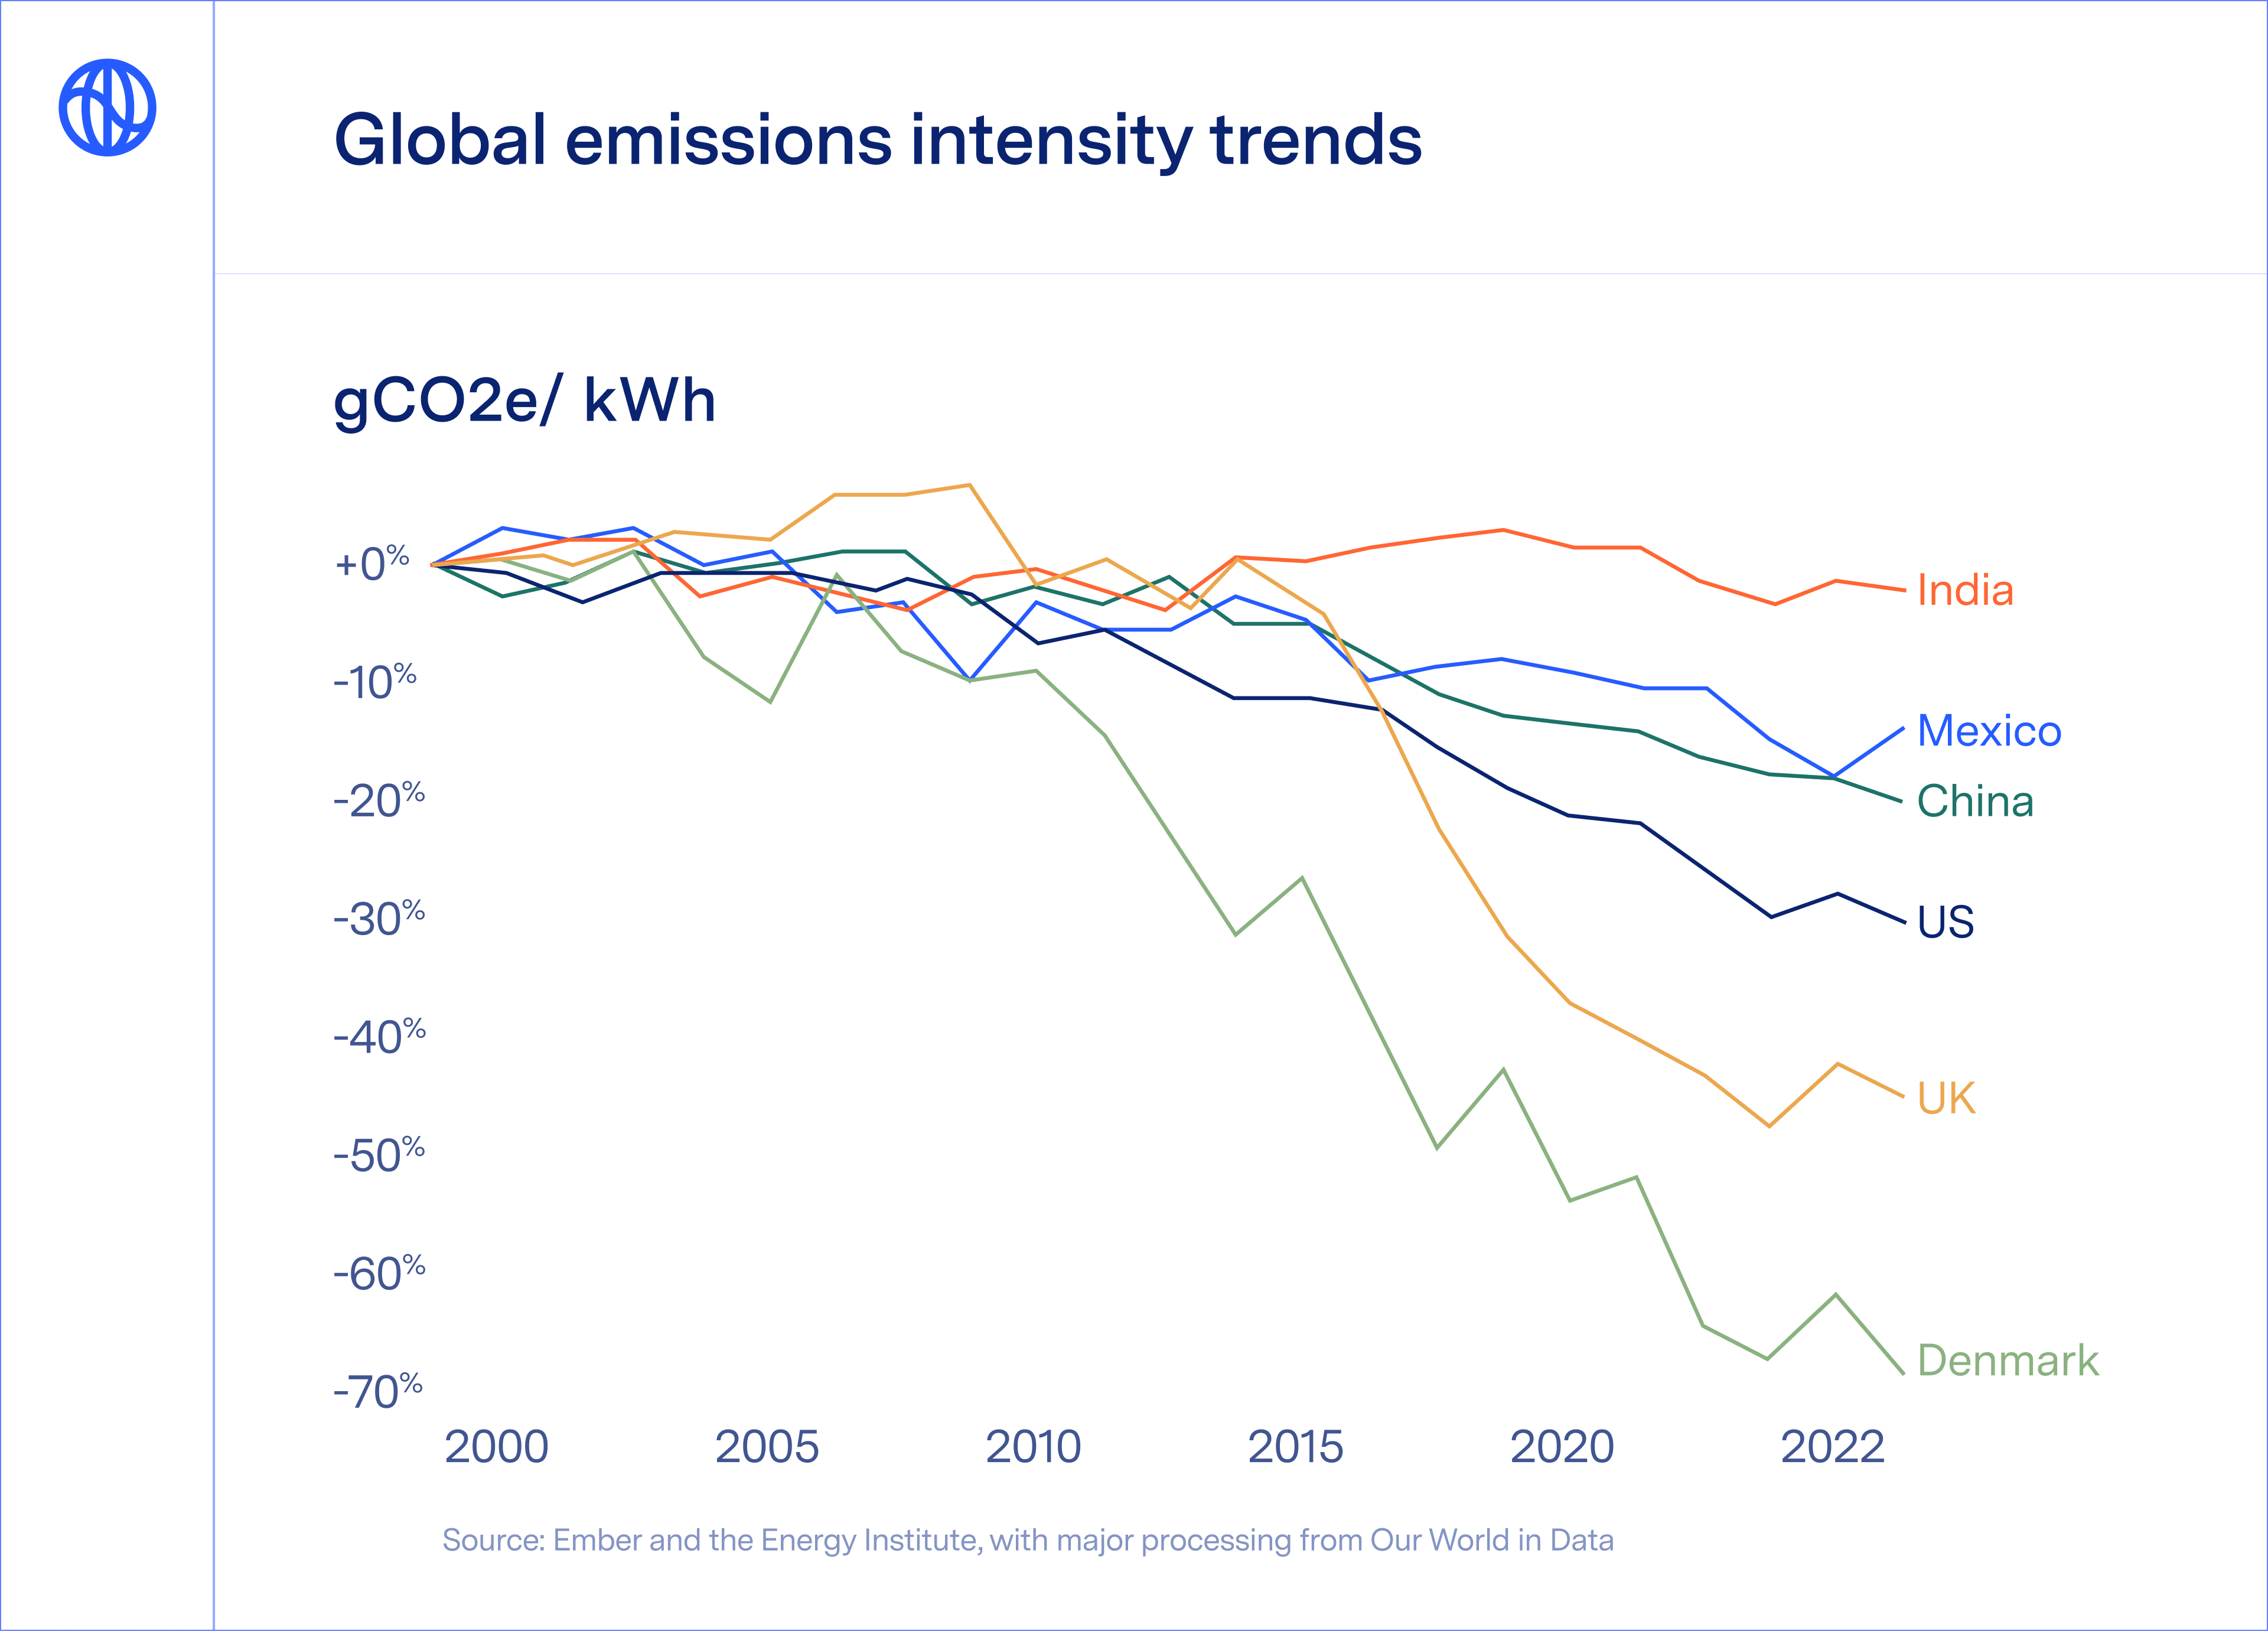 Global CO2 emission intensity trends by country